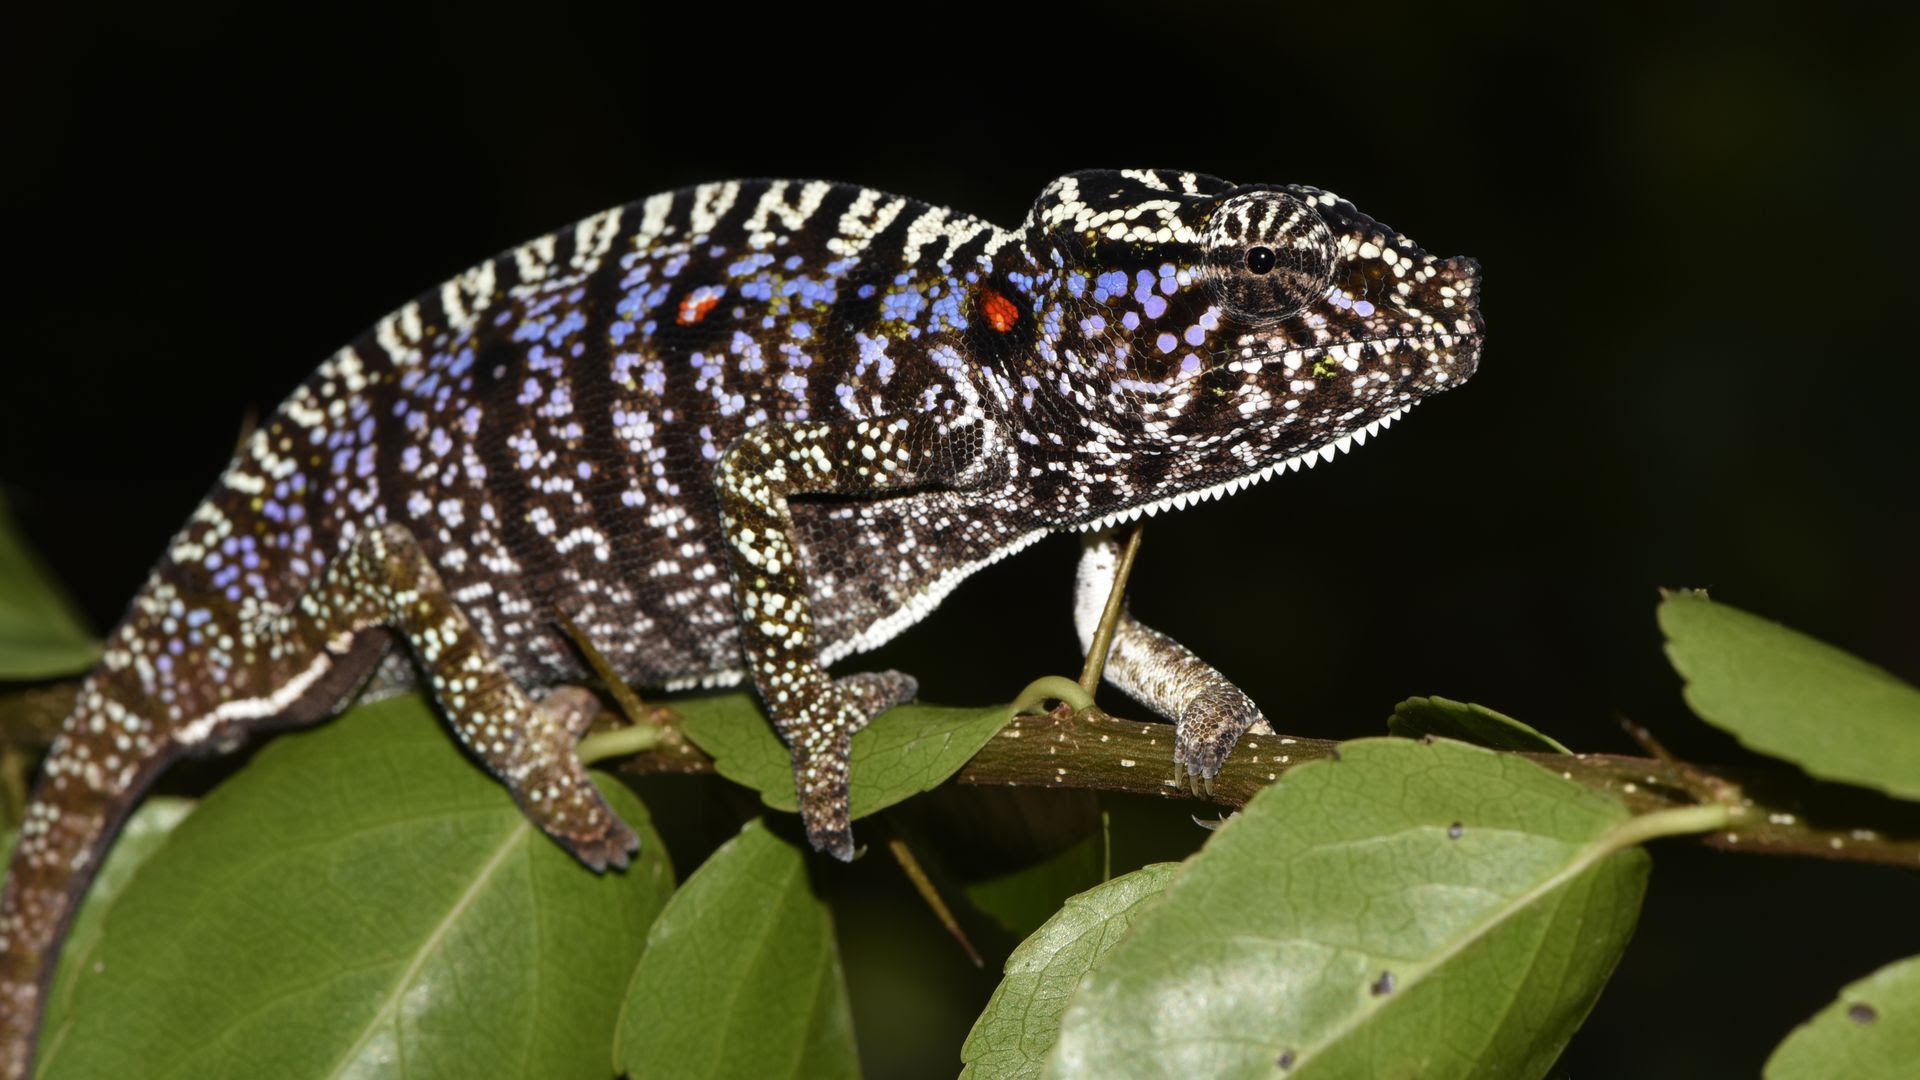 A Voeltzkow's chameleon in Madagascar in March. Photo: SNSB/Frank Glaw via AP